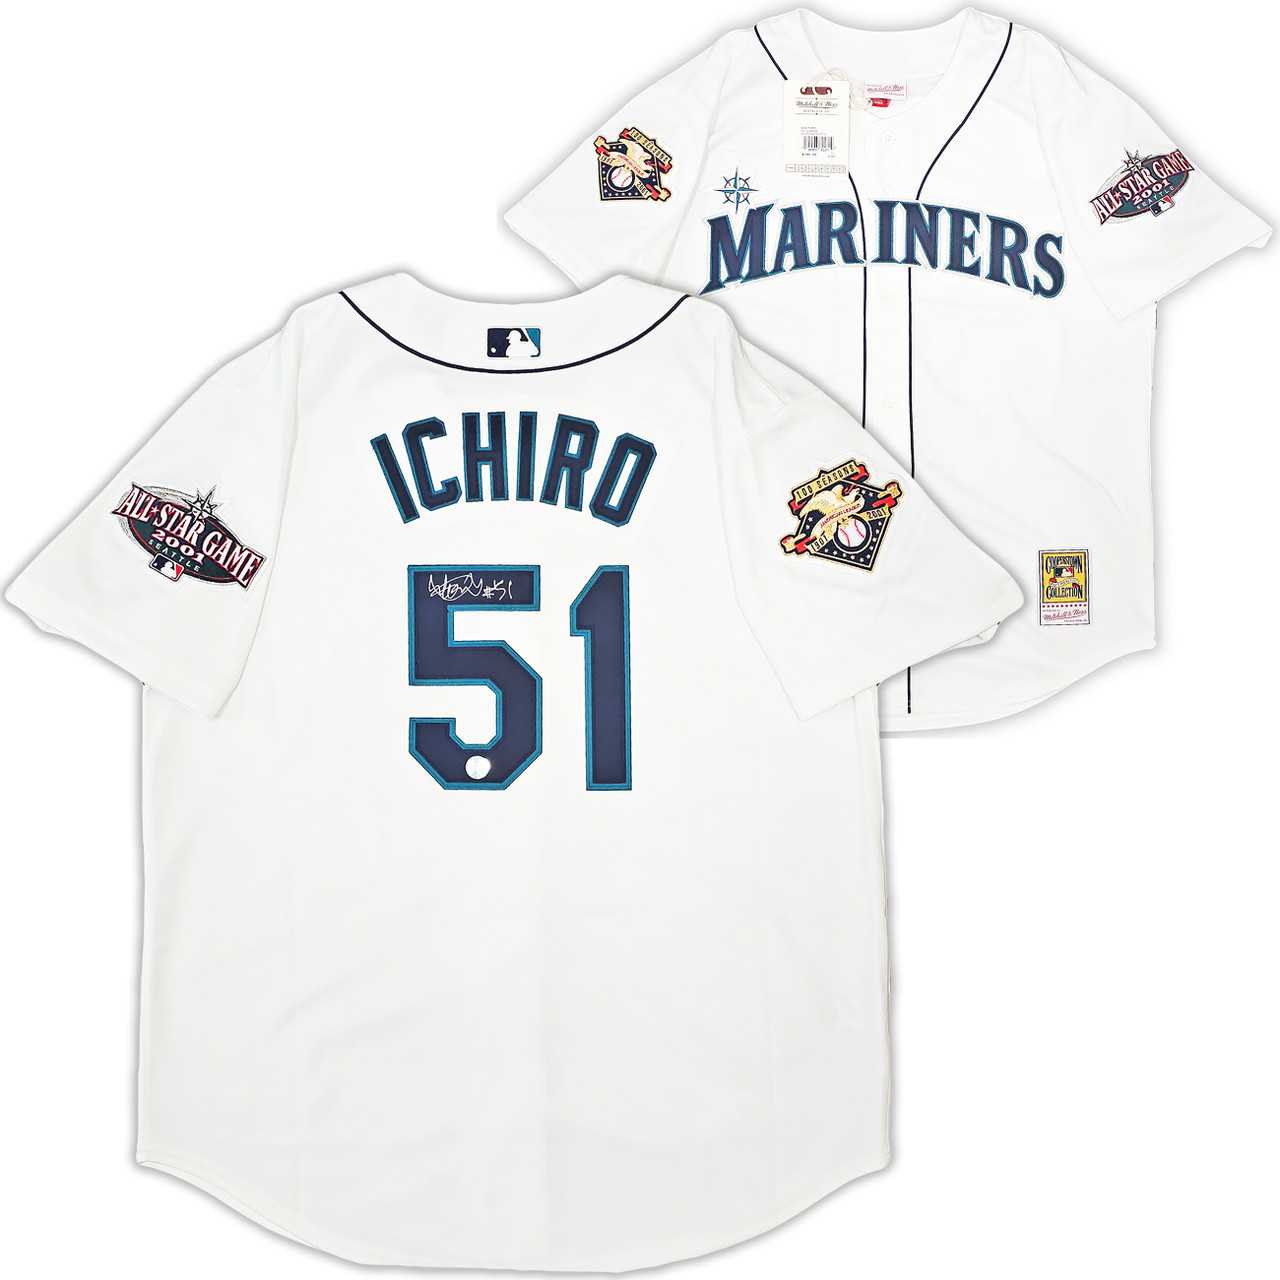 Mitchell & Ness on X: Two of Seattle's Most Legendary The 2001 Ichiro  Suzuki Seattle Mariners Authentic Jersey and 1997 Ken Griffey Jr. Authentic  Jersey are now available at  MLB trademarks